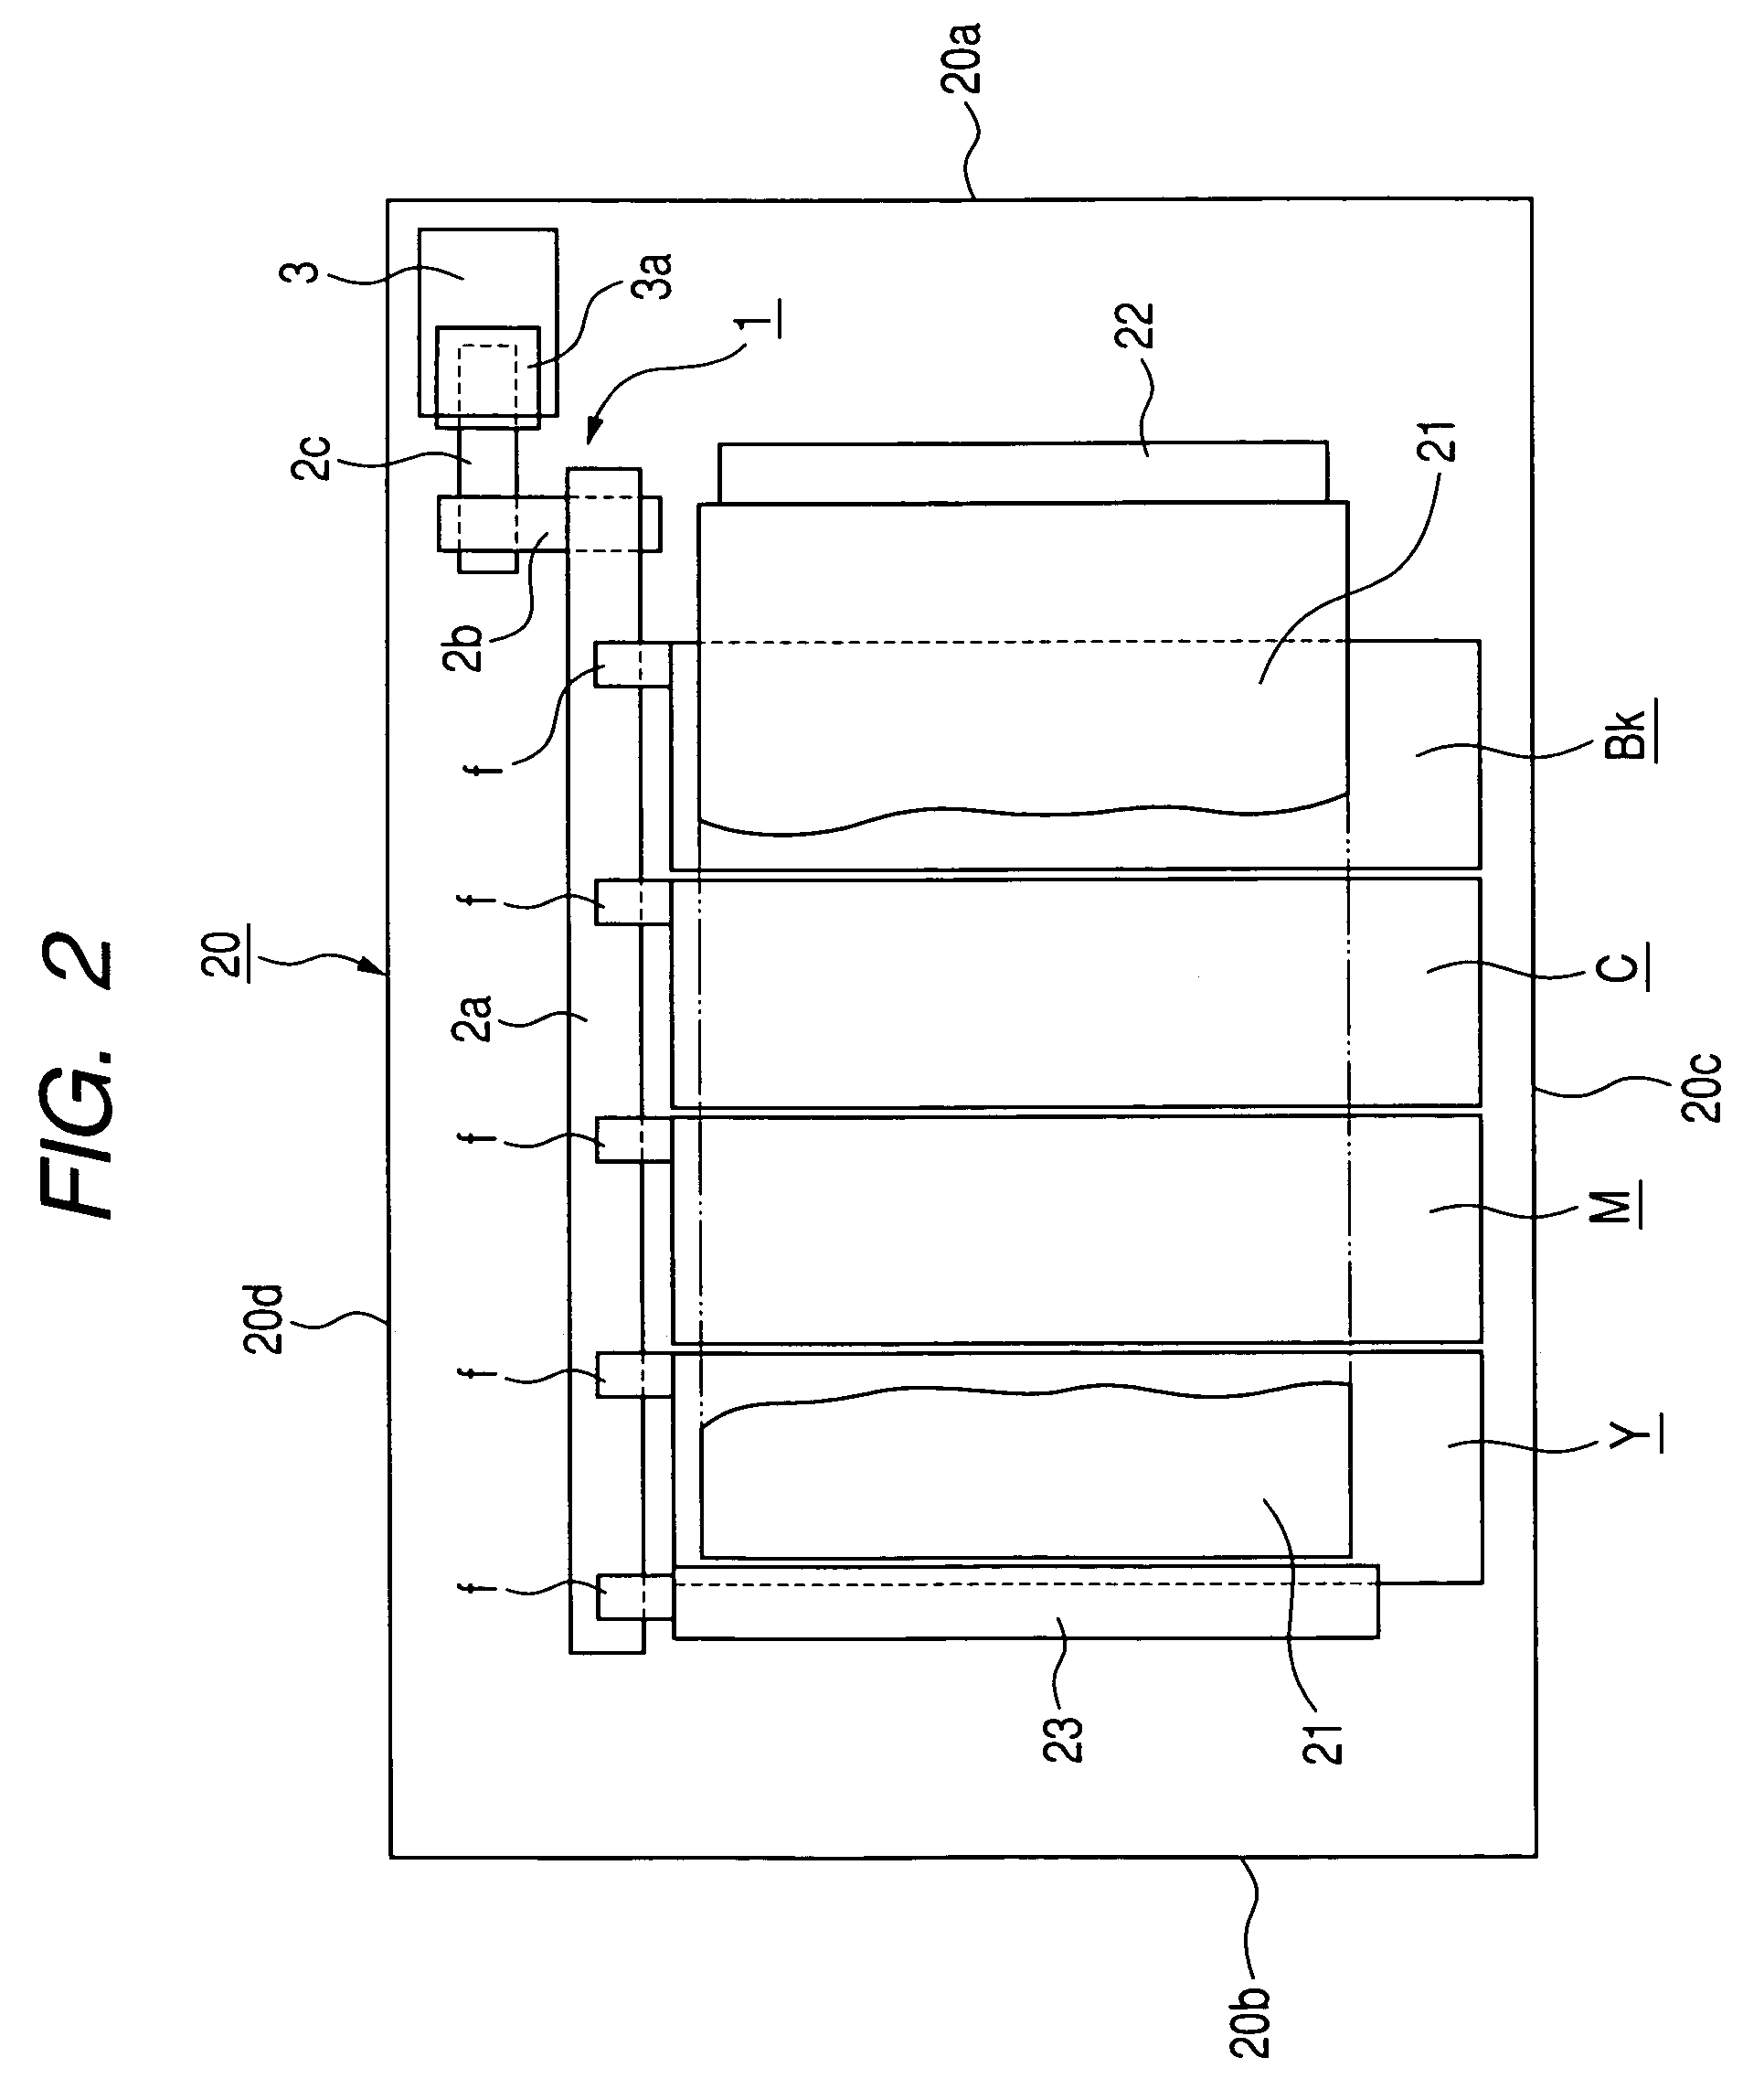 Image forming apparatus featuring upward and downward toner carrying paths